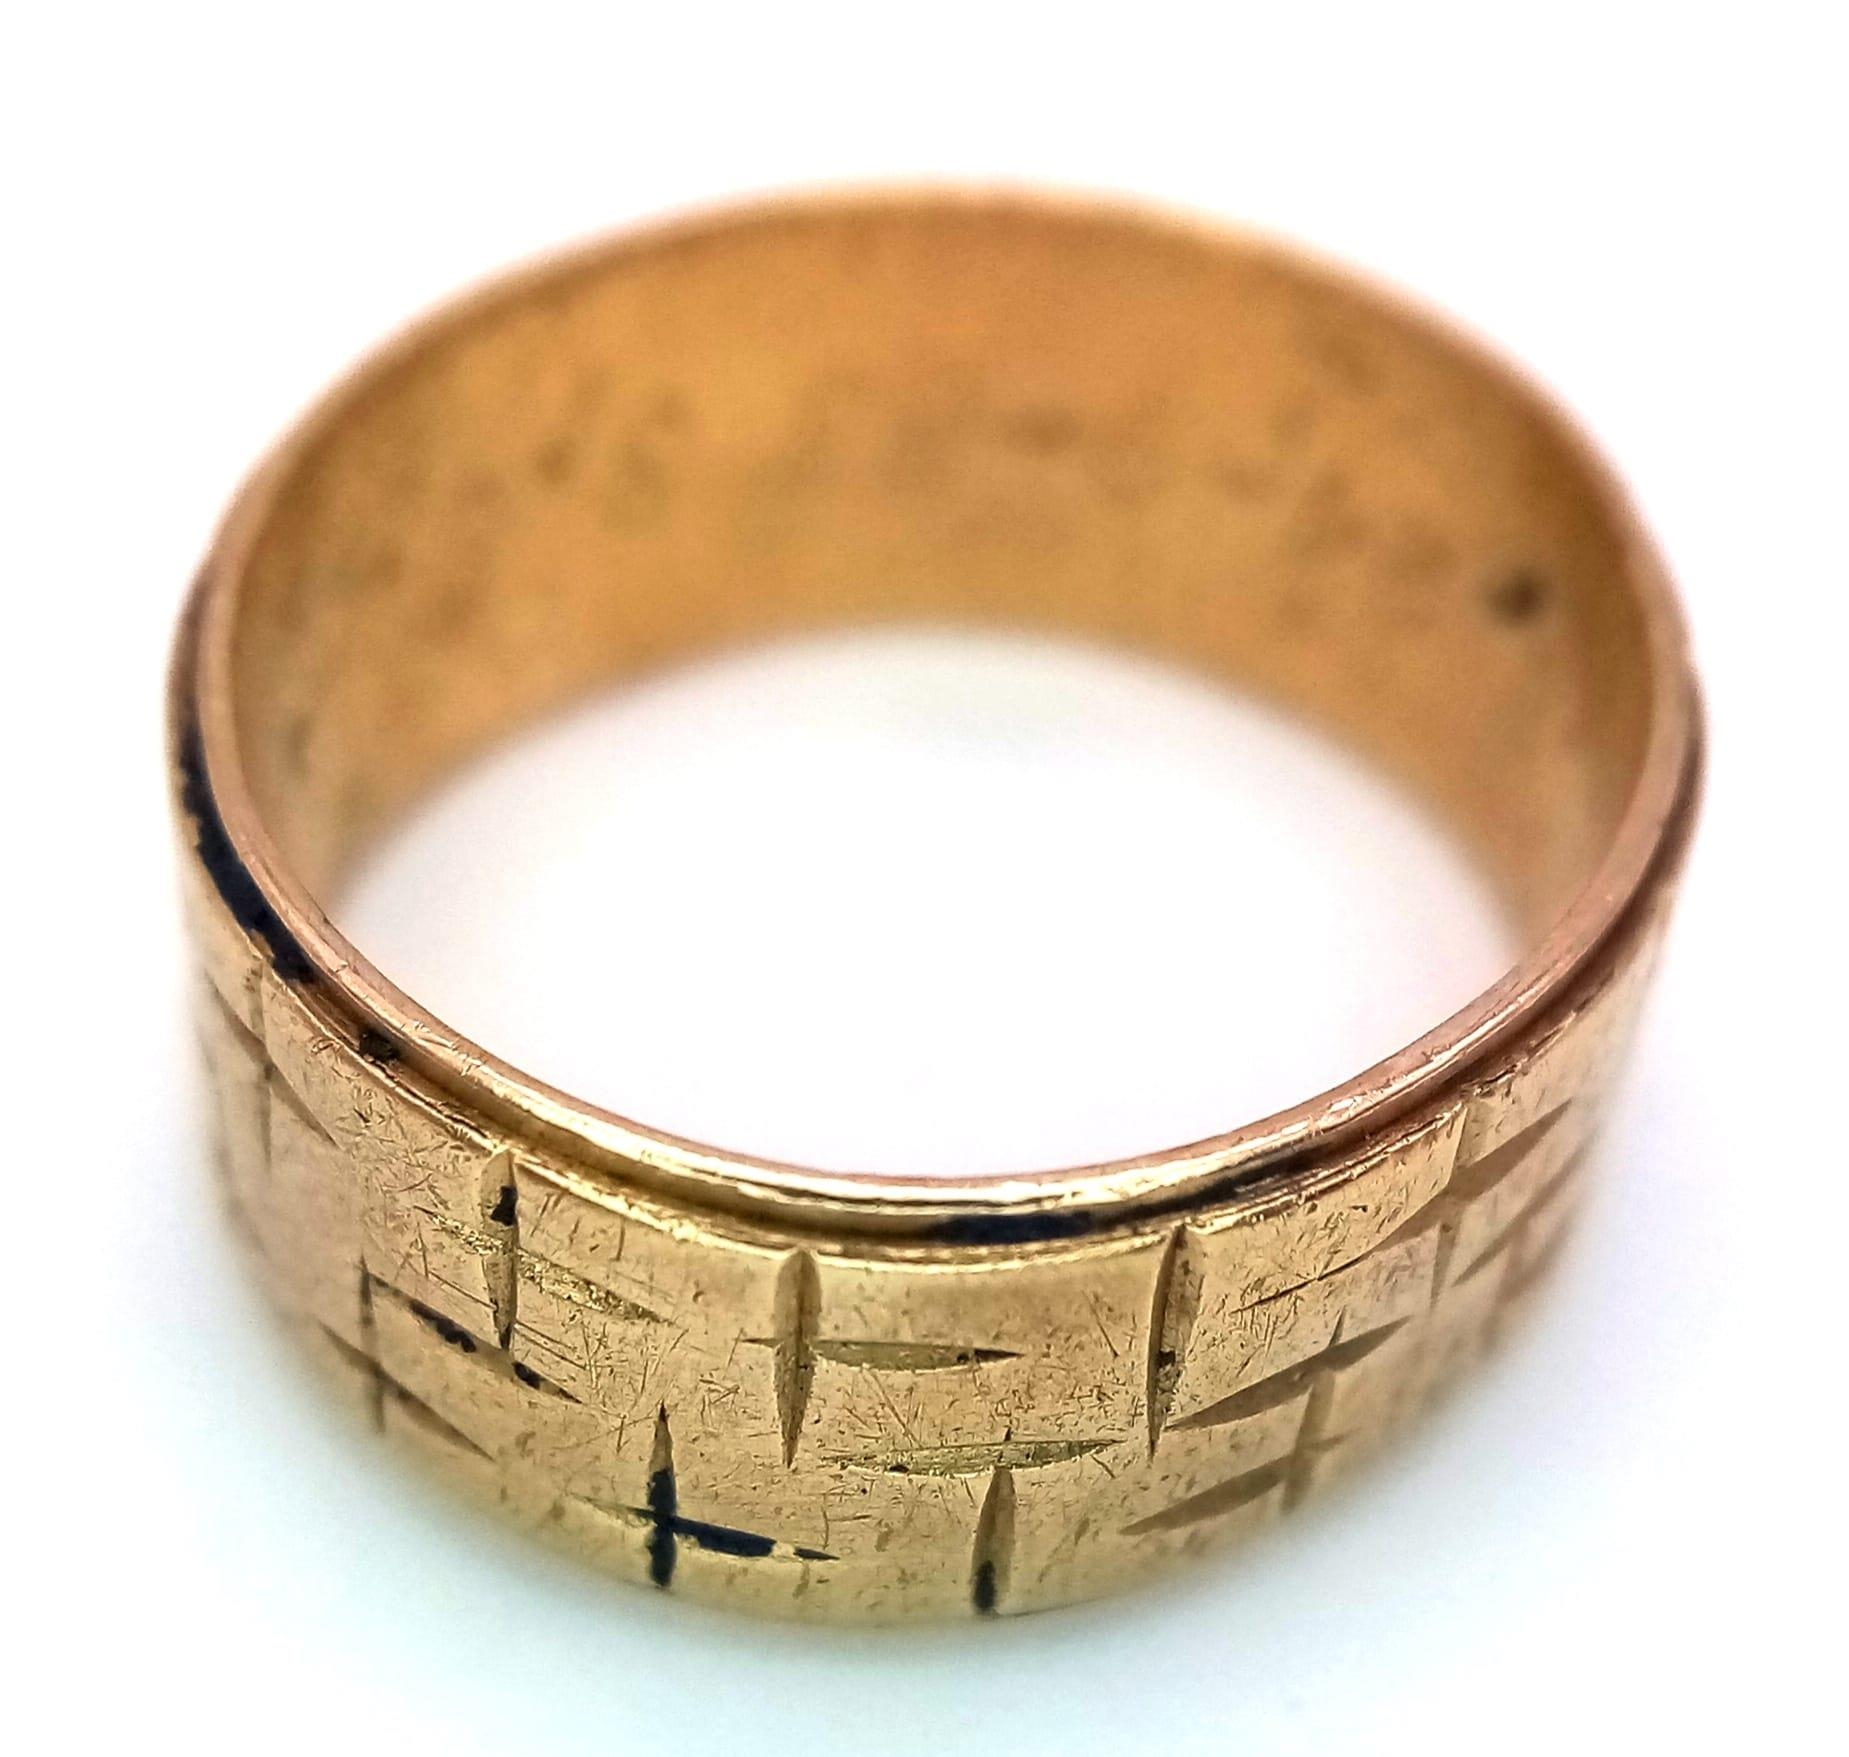 A Vintage 9K Yellow Gold Band Ring. Geometric decoration. 7mm width. Size O. 4.3g weight. - Image 4 of 5